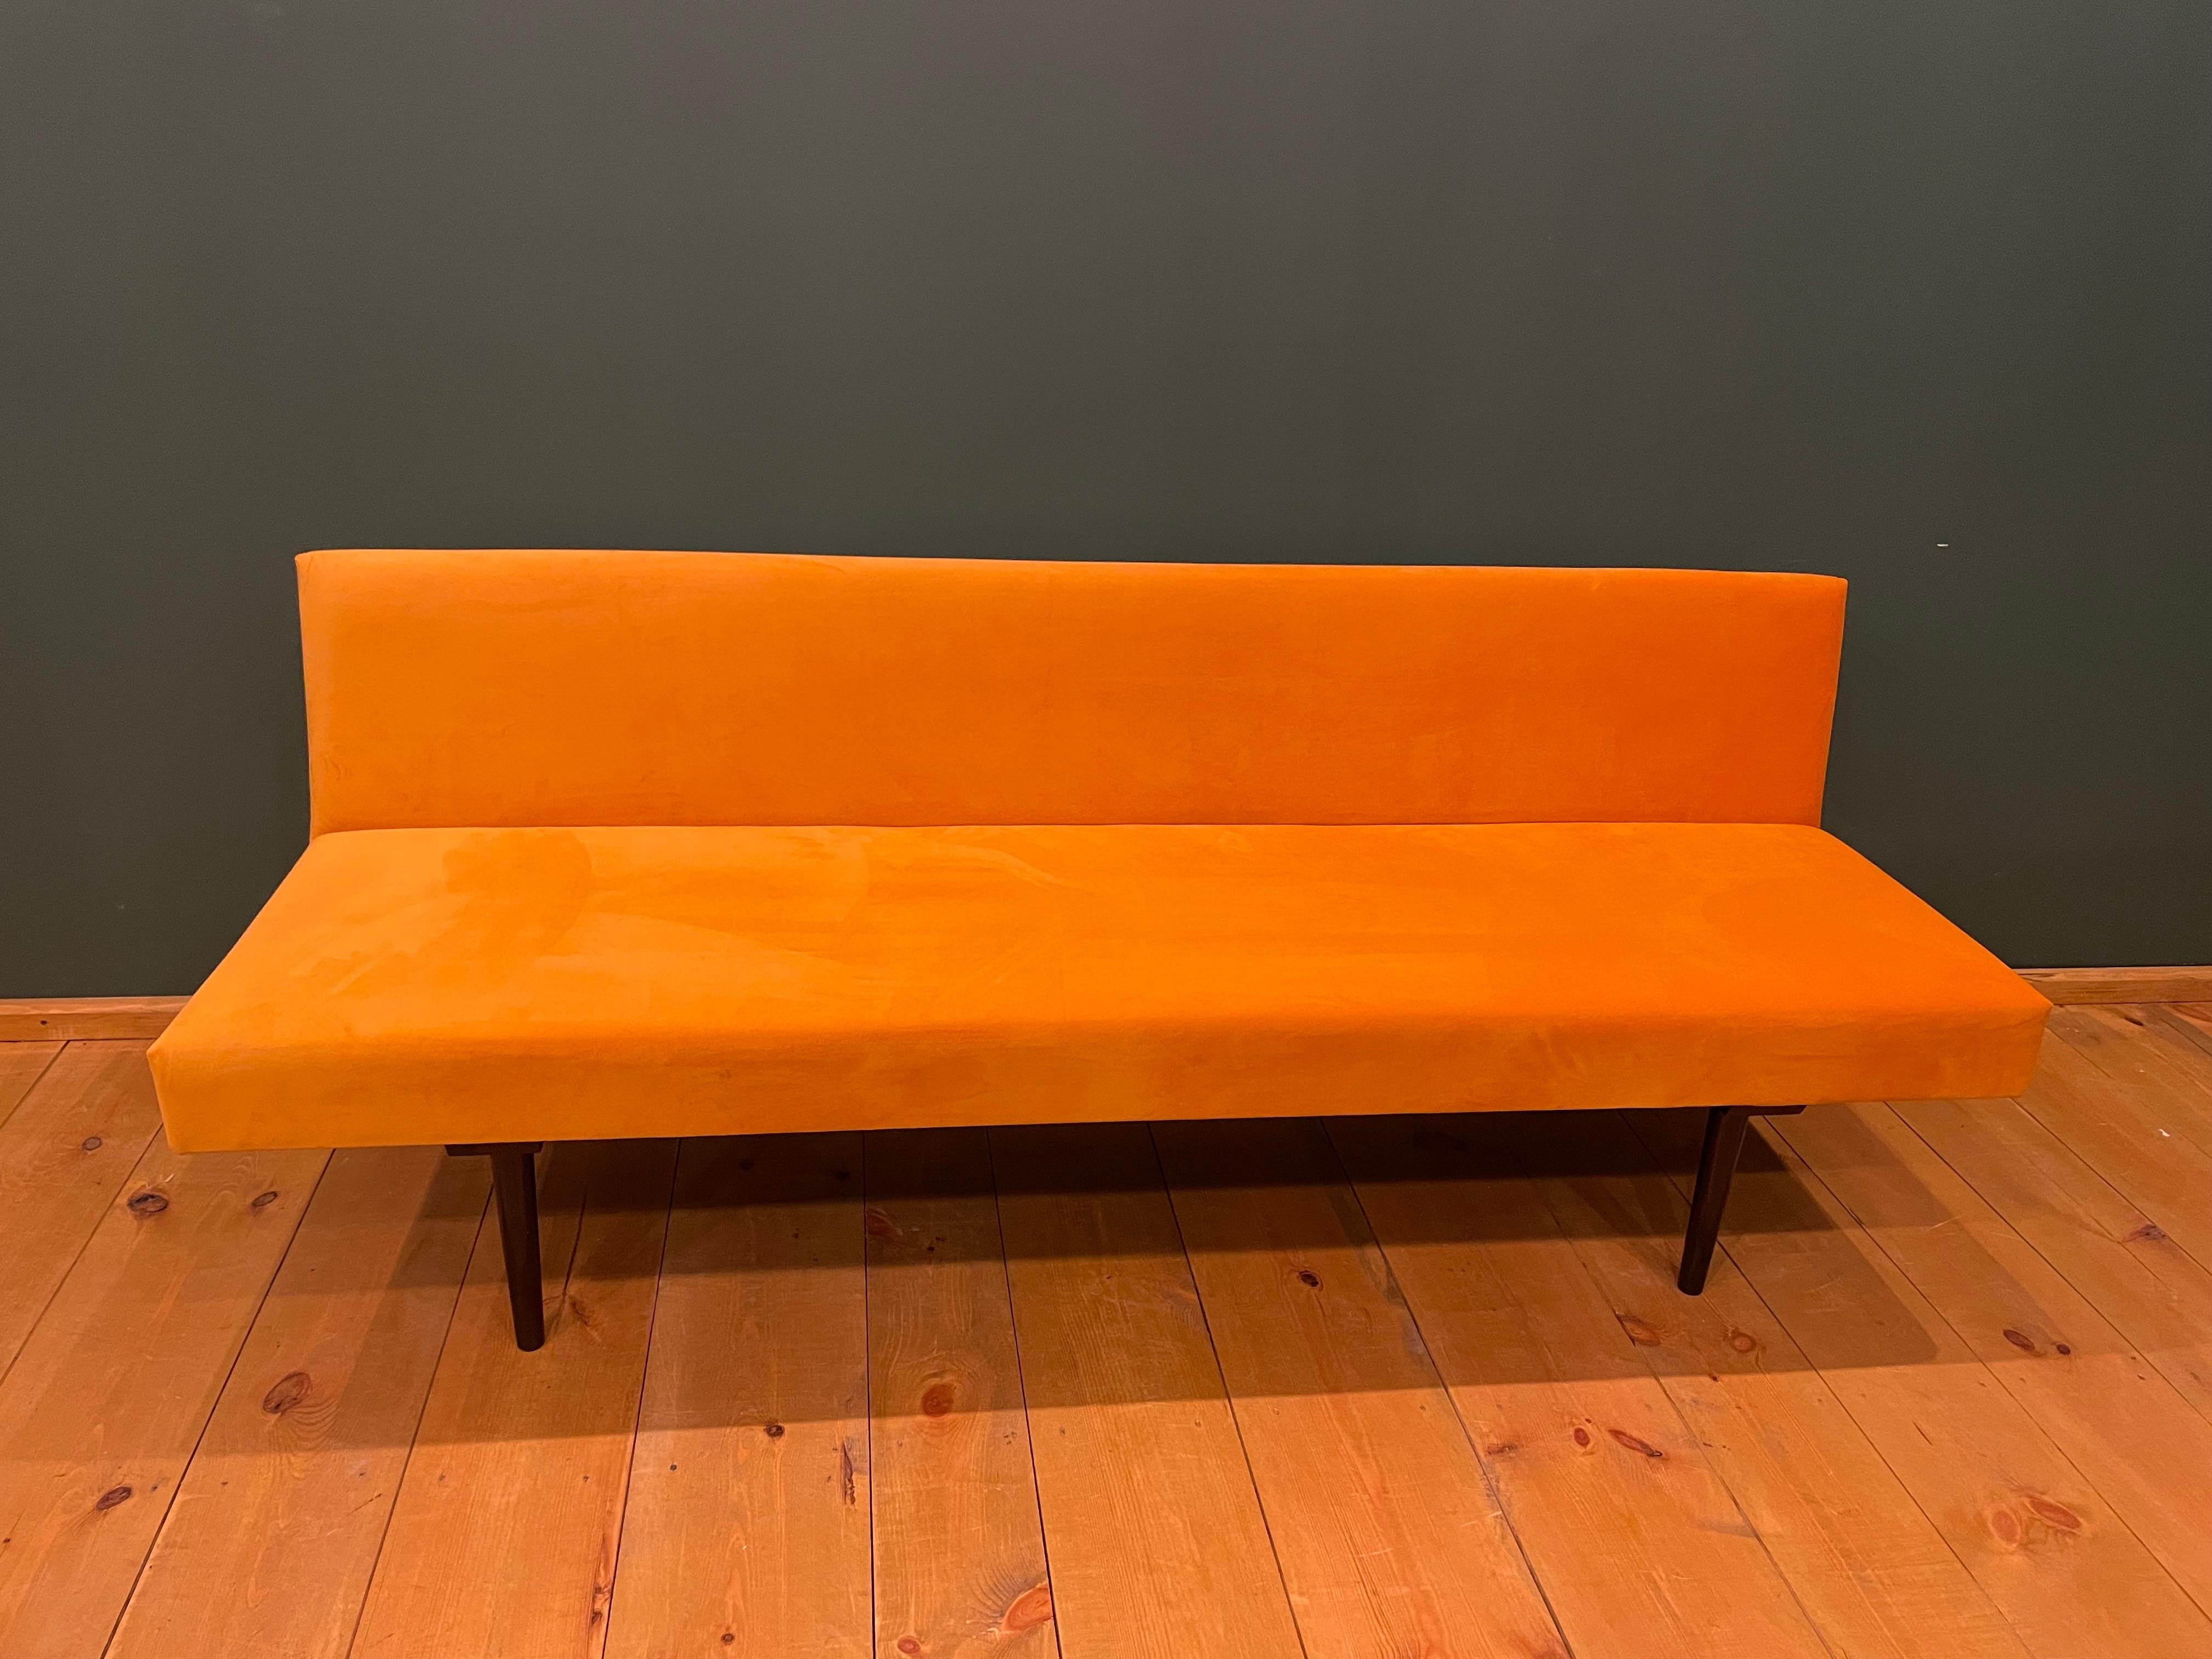 Design couch J.Halabal from 1960
We present designer sofa by J.Halabala, It was made in the Czech Republic in the Up Zavud factory
It has been given a complex manual renovation, the whole upholstery has been replaced with a new one. Wooden parts are